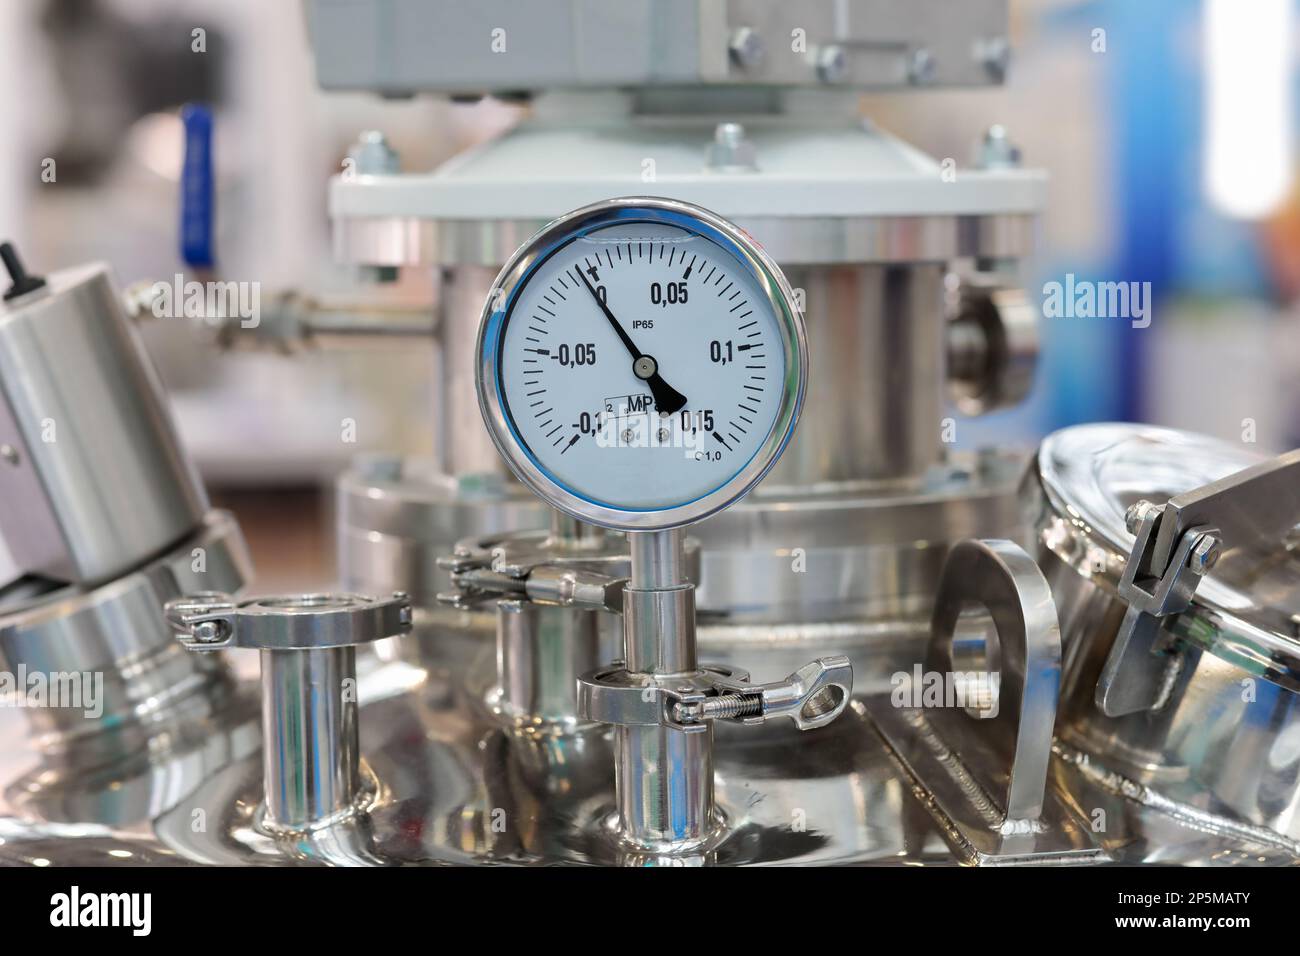 Stainless steel industrial chemical reactor with pressure gauge. Selective focus. Stock Photo